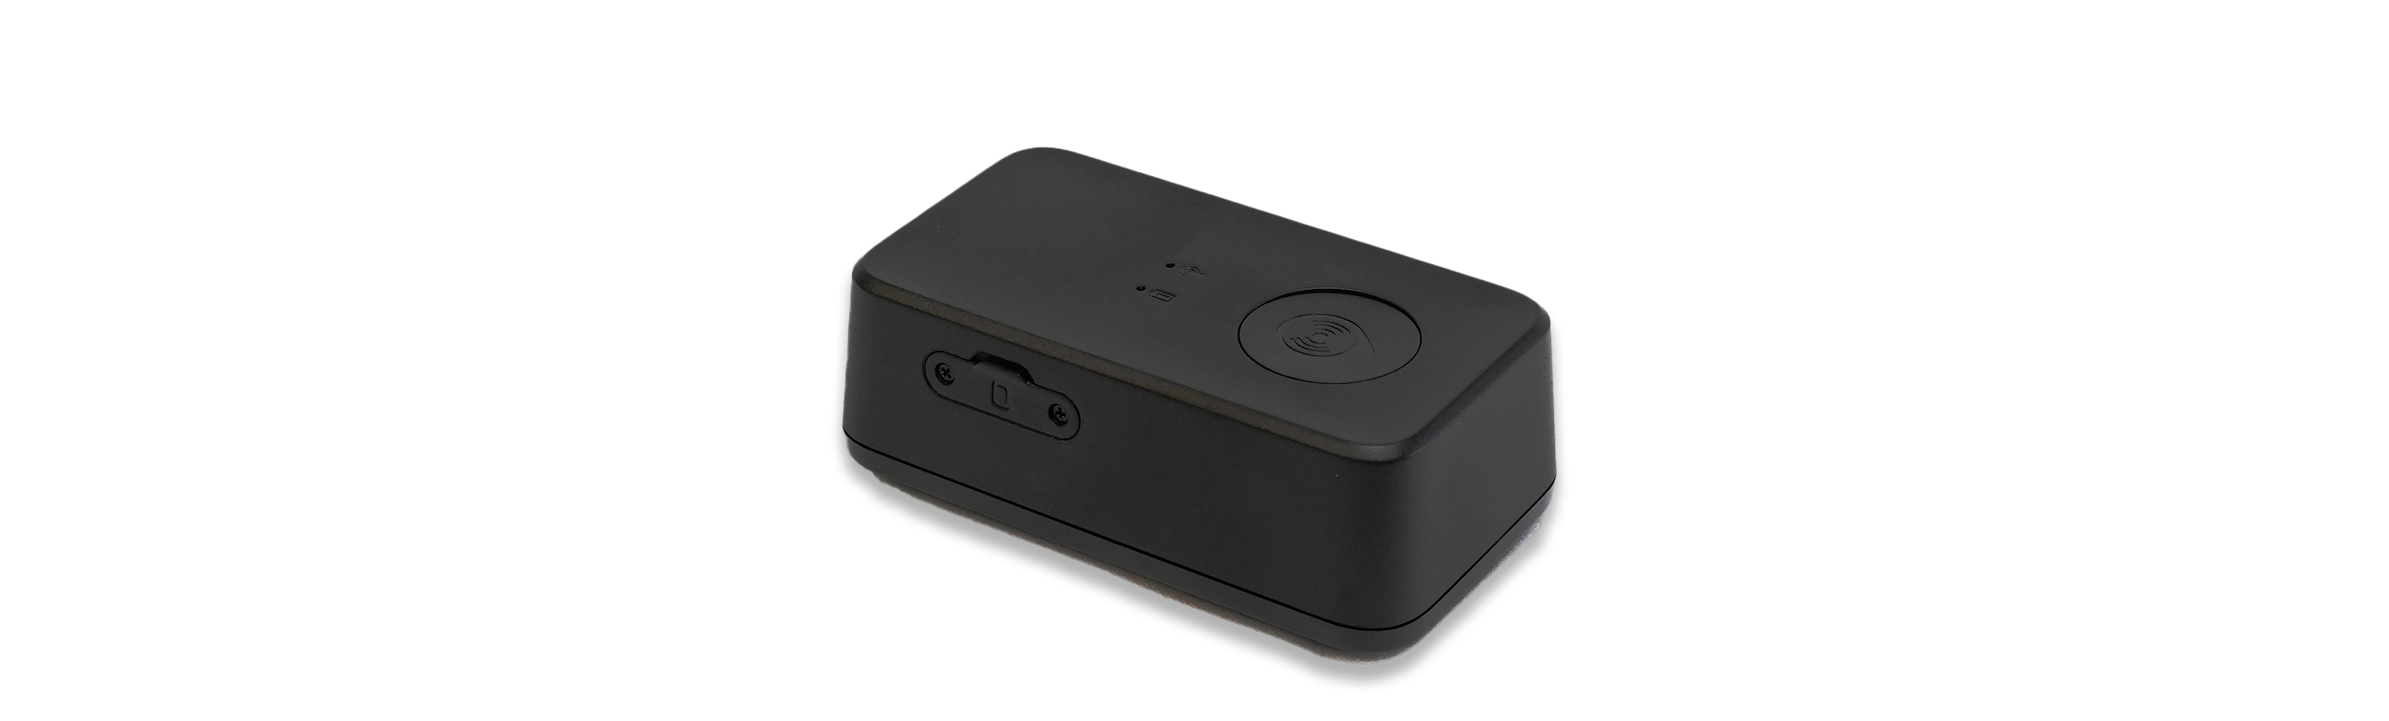 Prime GPS Tracker with no background